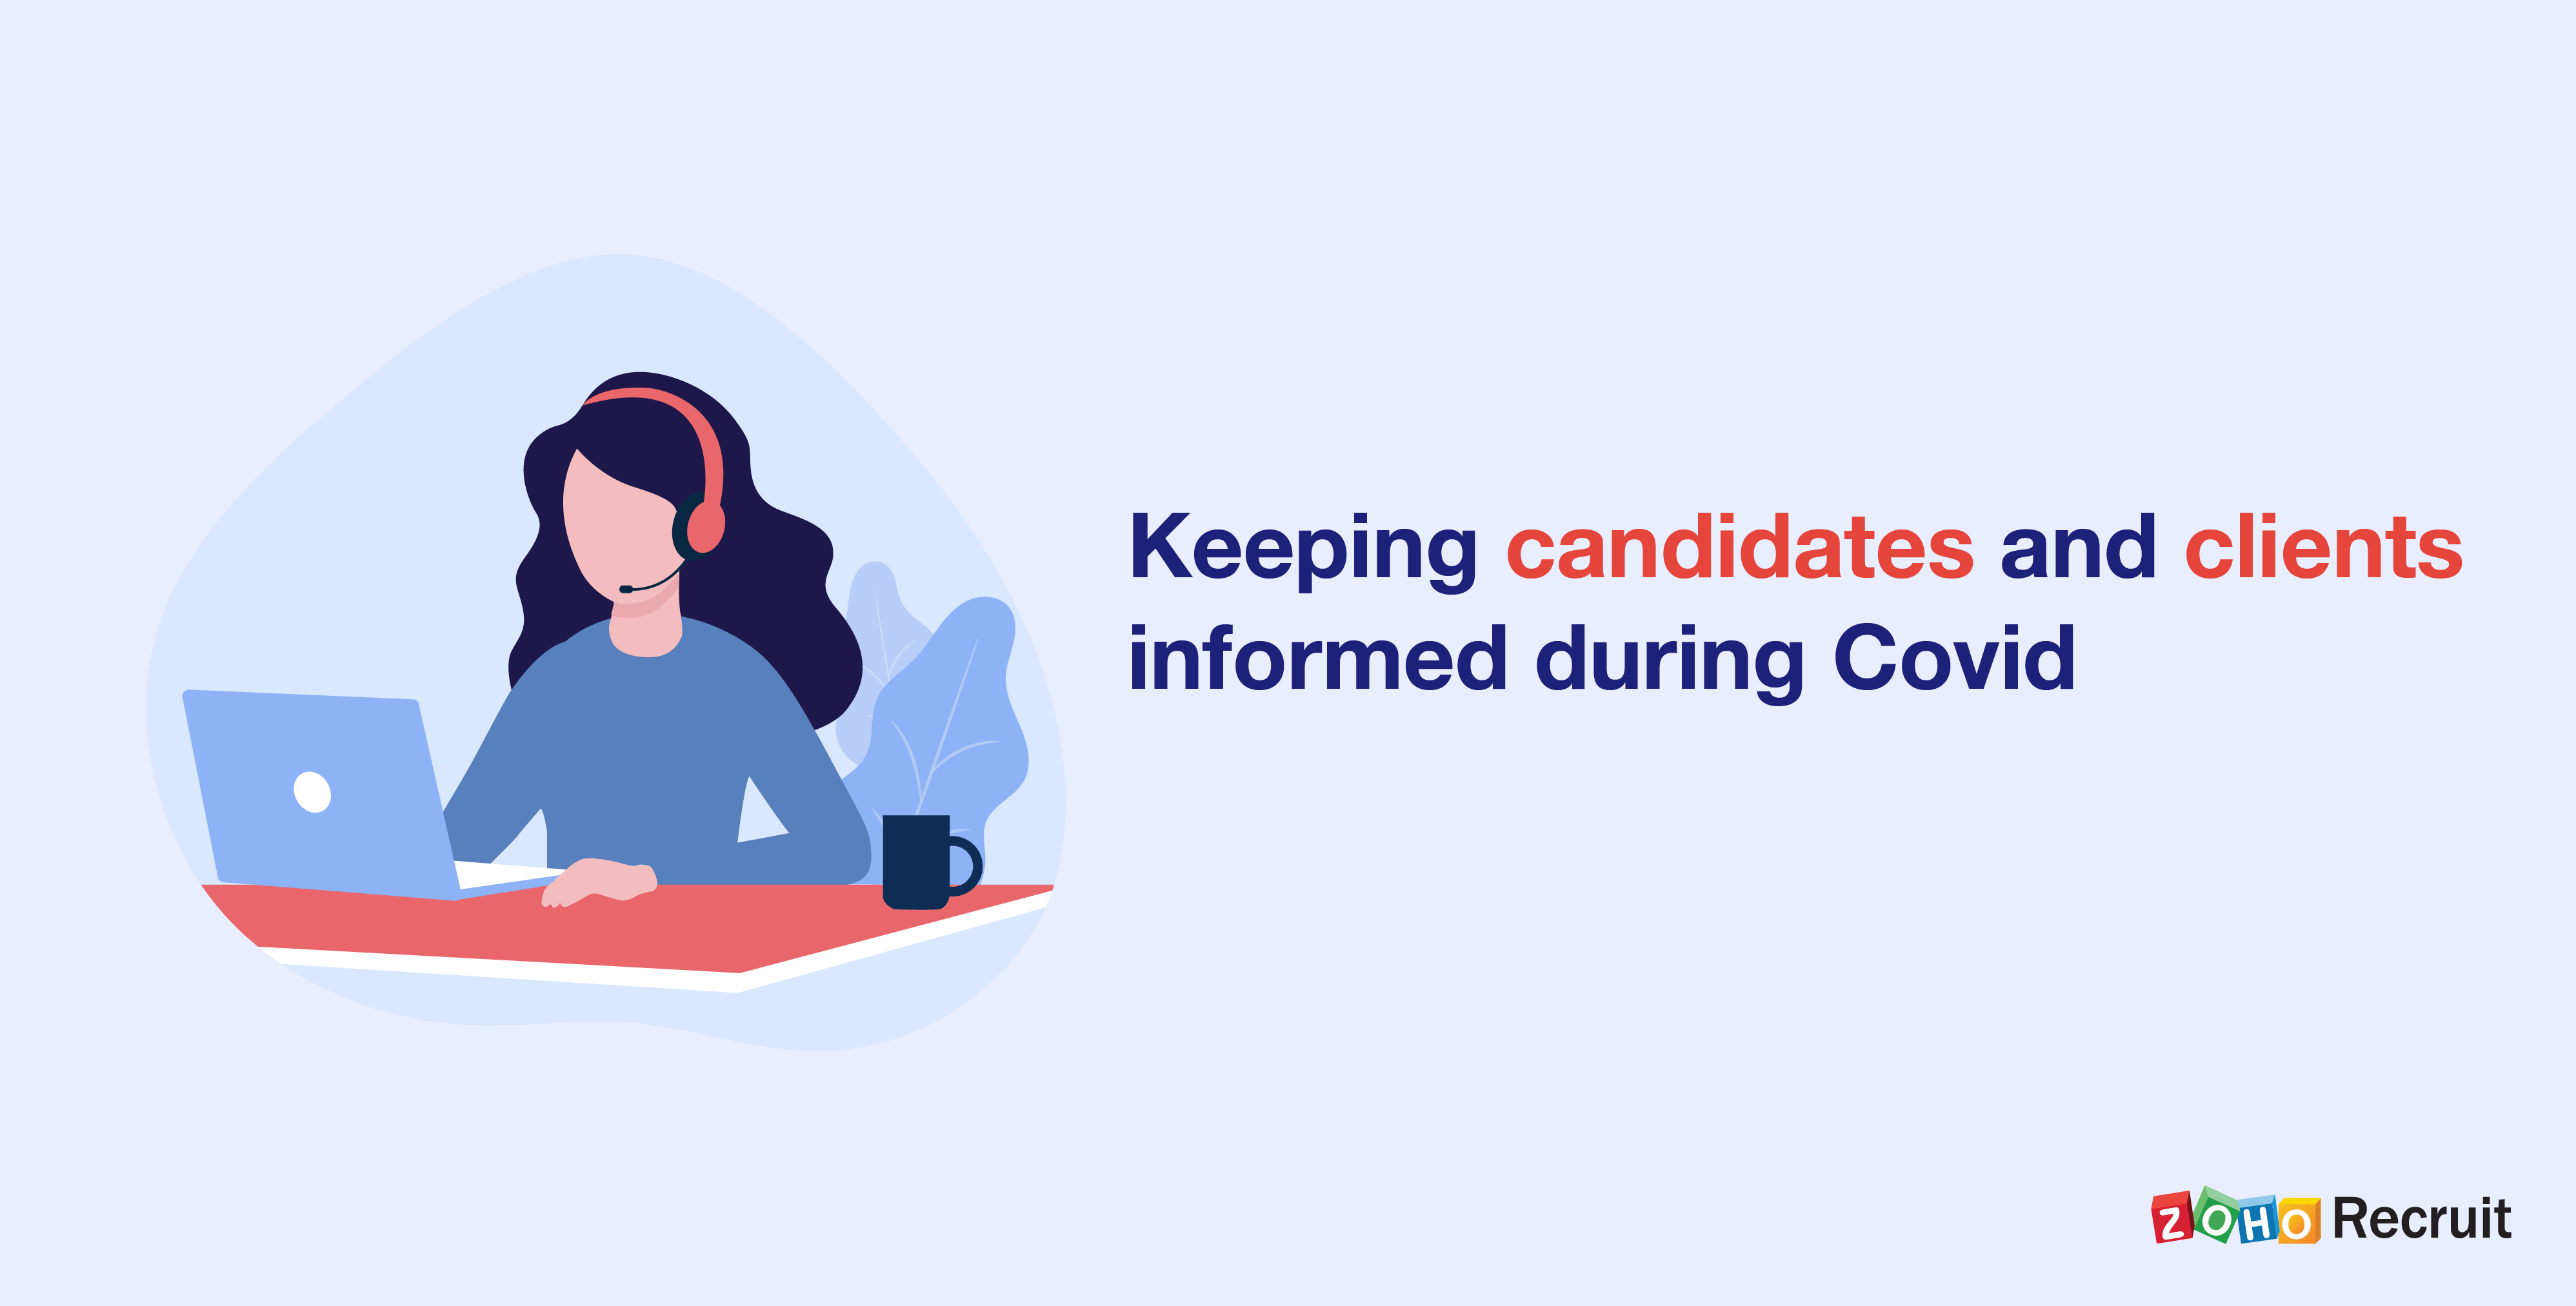  Keeping candidates & clients informed during COVID-19 